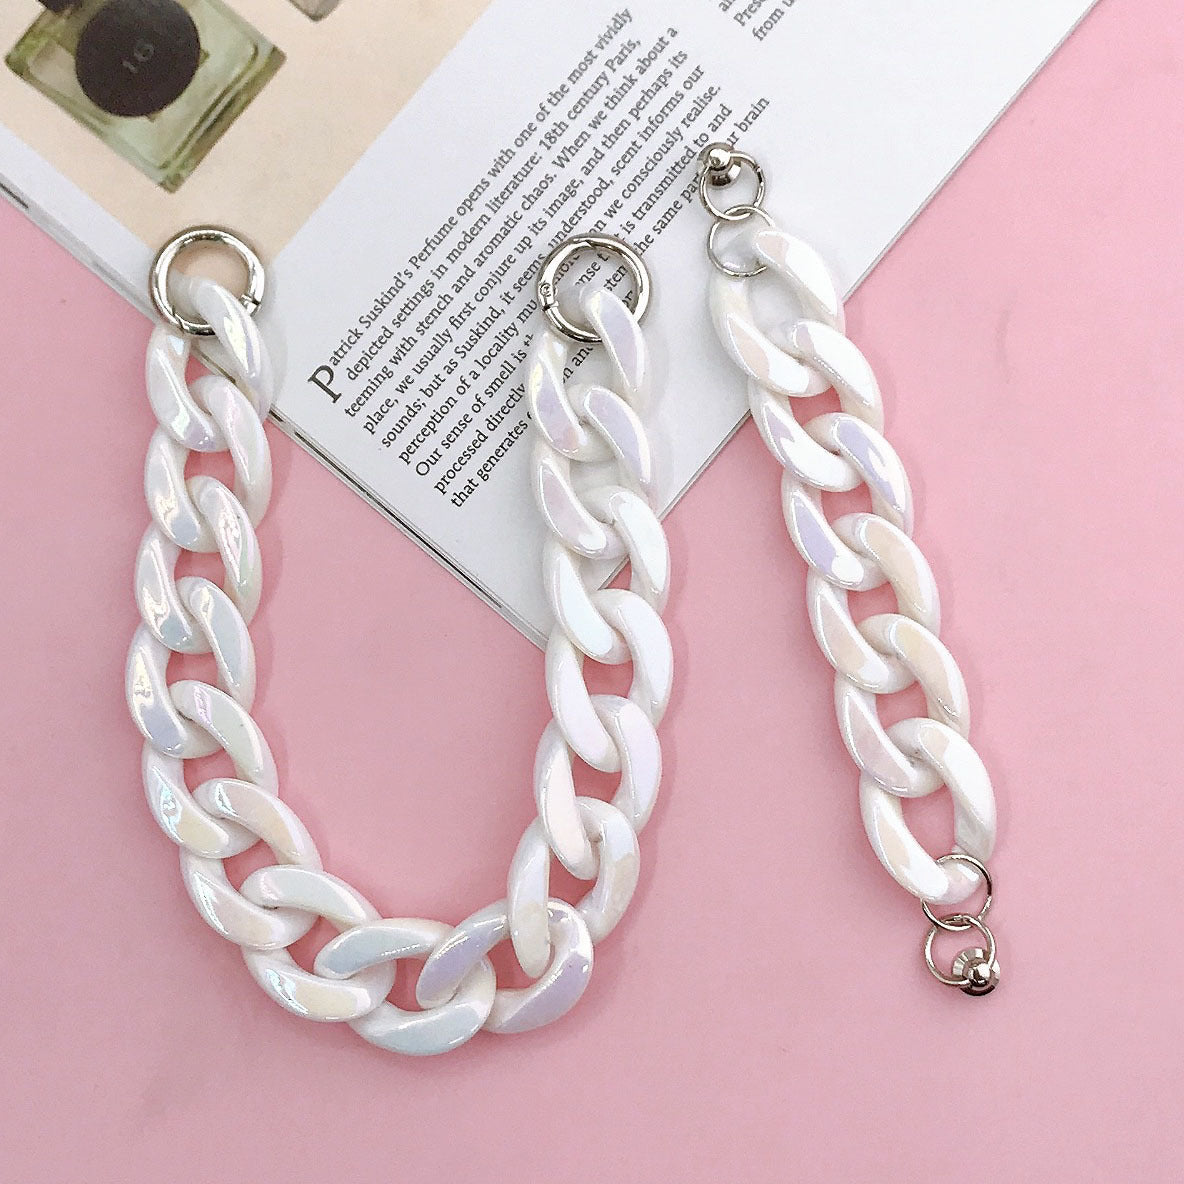 Acrylic linking chain rings necklace chain lanyard with Shockproof Phone Case for Phone